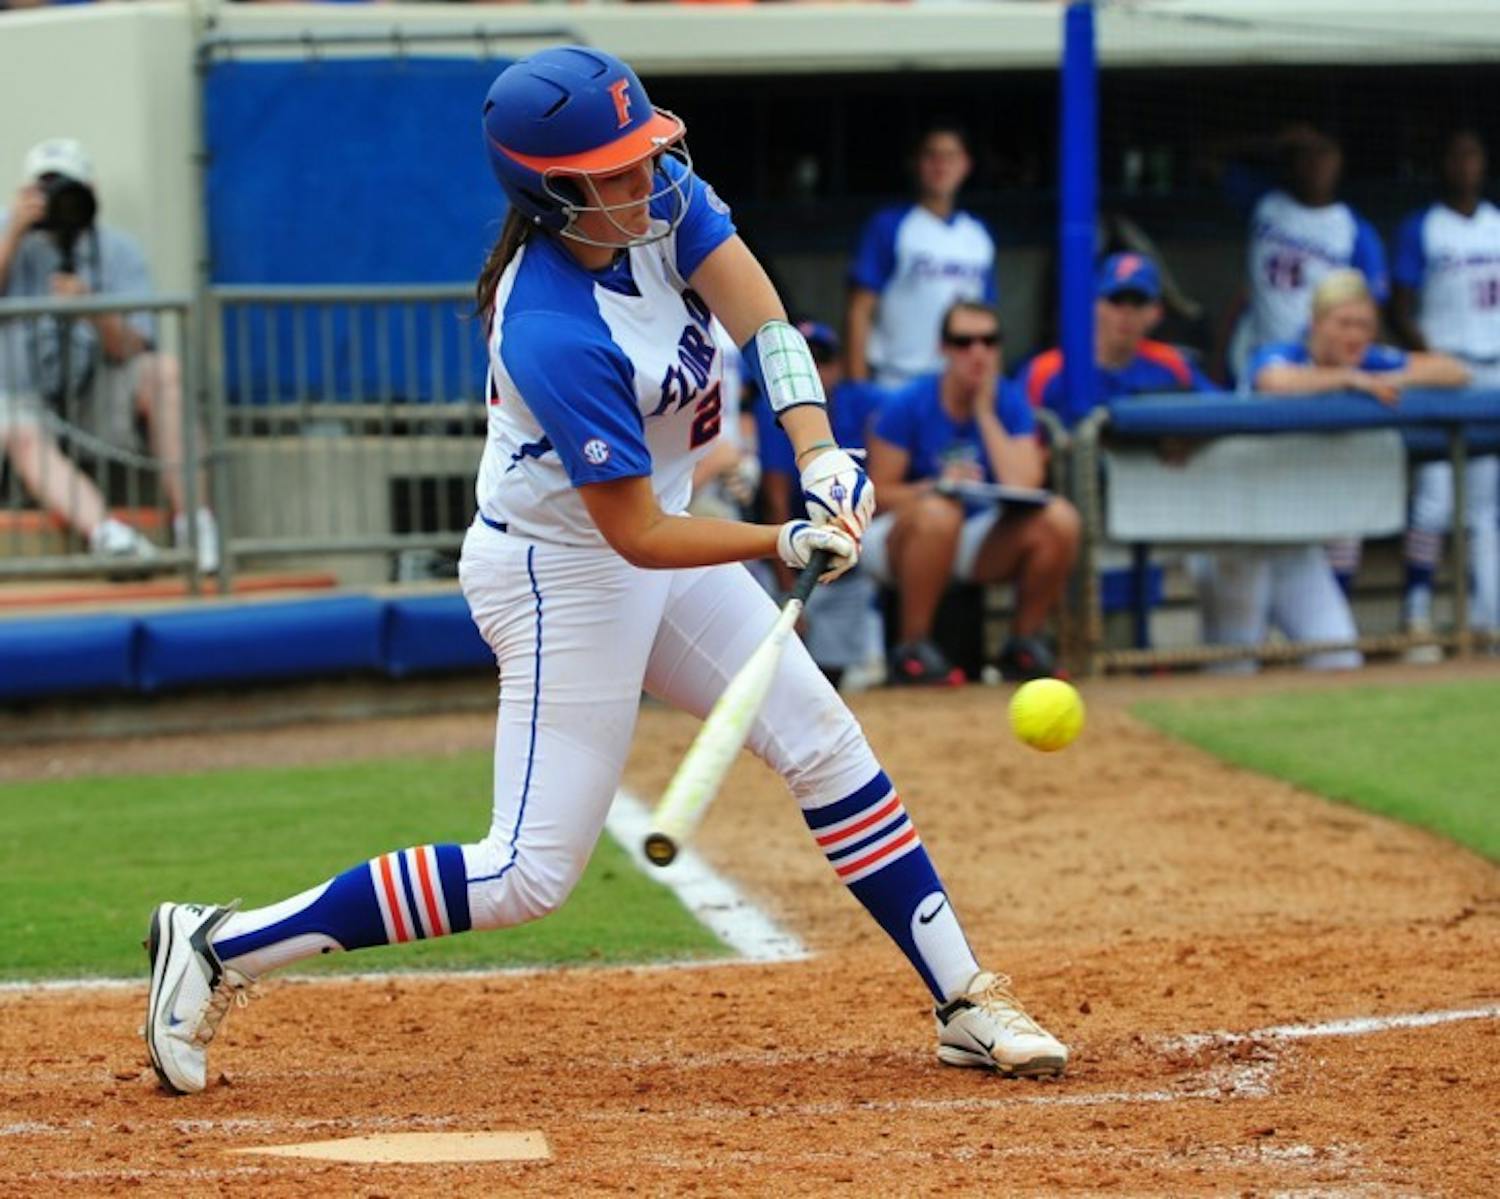 Kelsey Horton connects with a pitch in Florida's 5-2 win against Auburn on April 15, 2012. Horton hit a home run in Florida's 10-4 win against Missouri in the SEC Tournament final on Saturday.&nbsp;